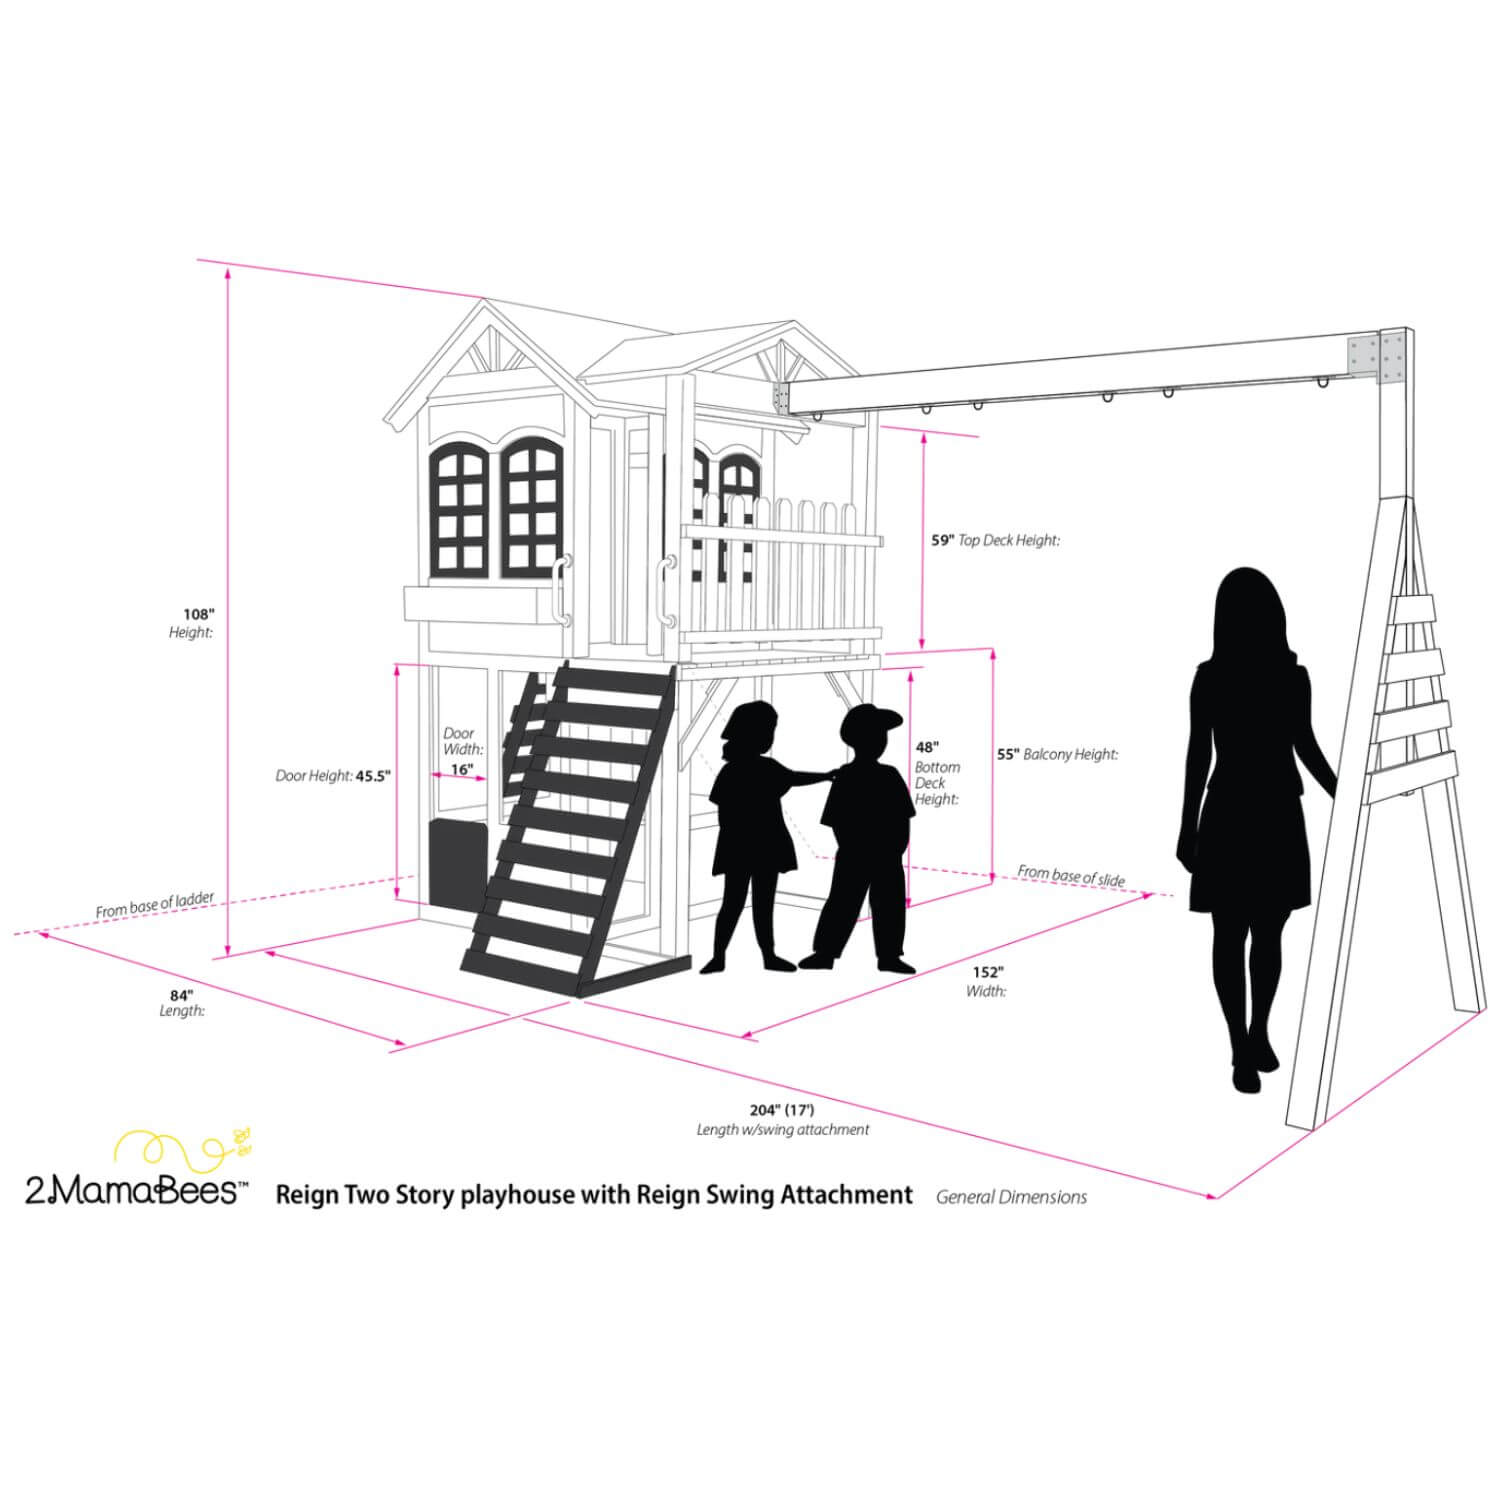 2MamaBees Reign Two Story Playhouse with Reign Swing Attachment - Dimensions